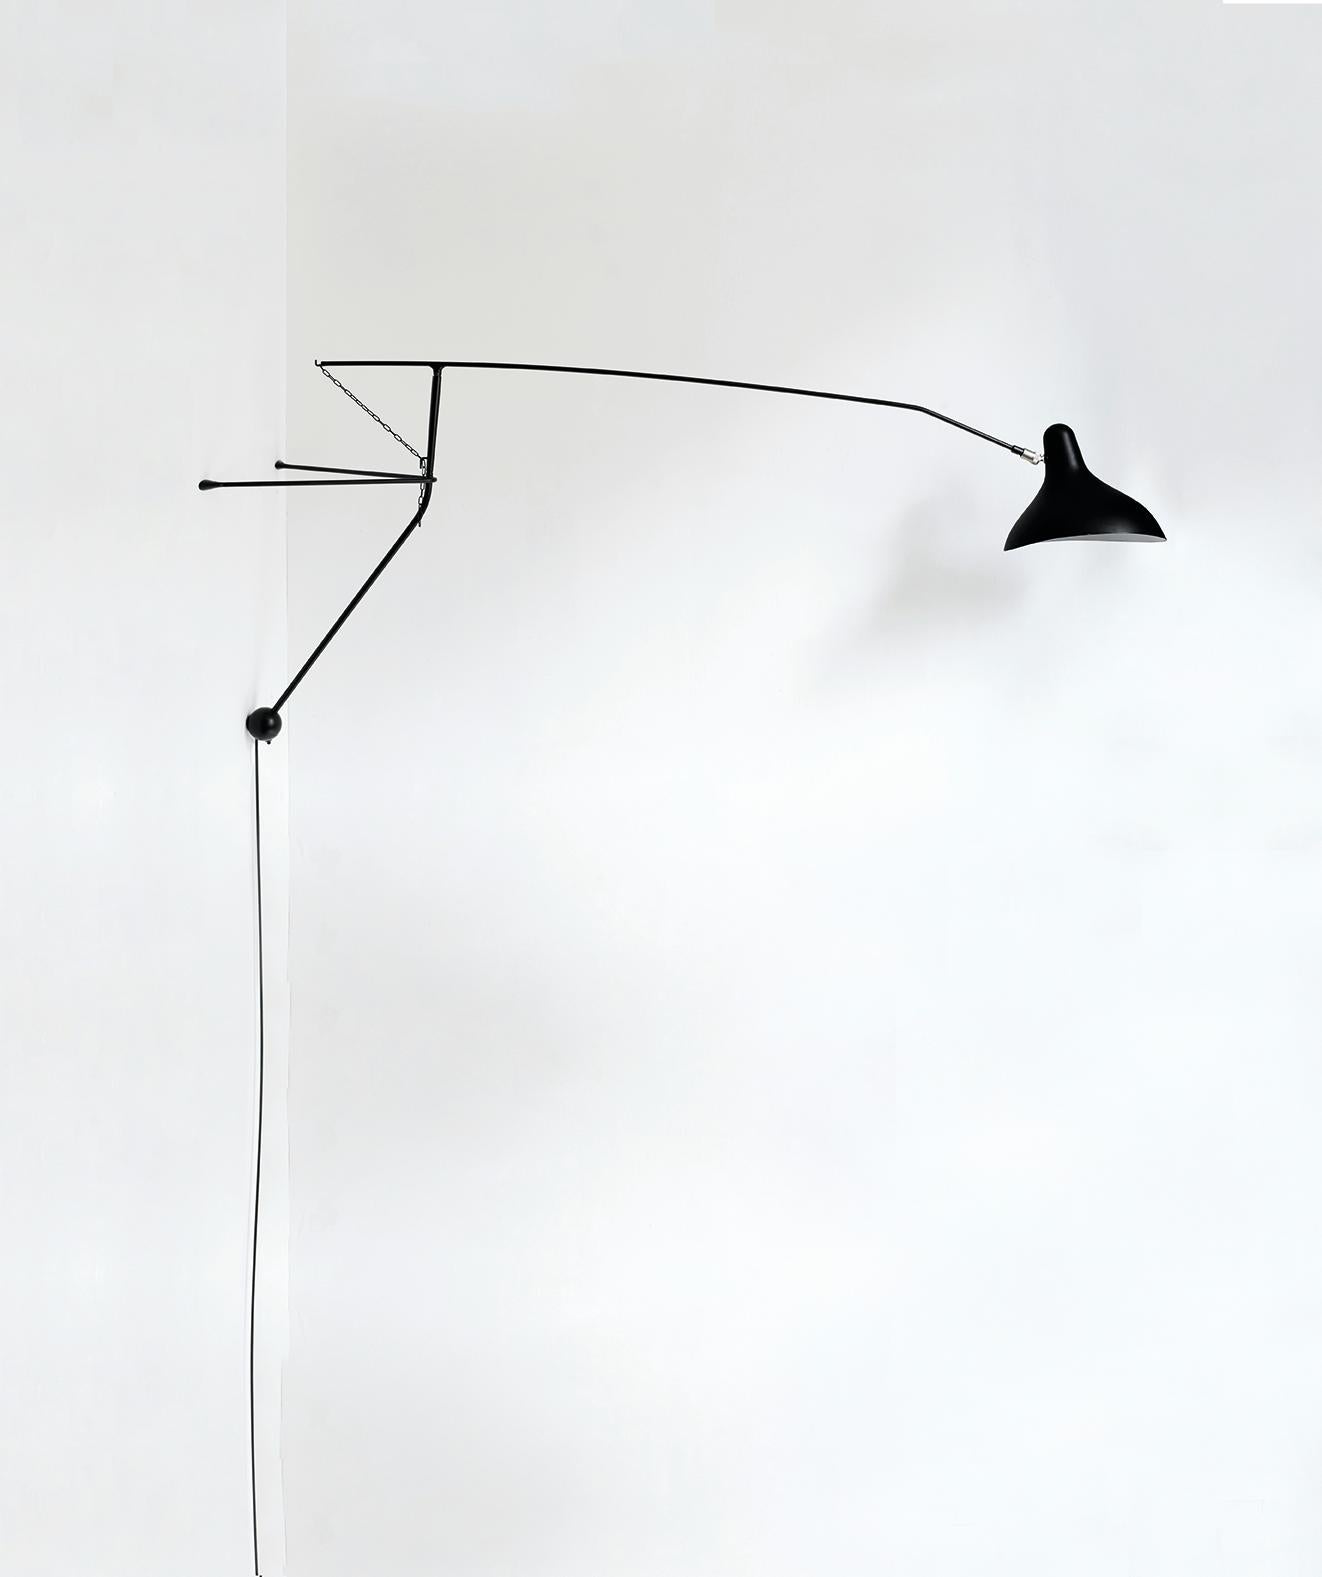 Mantis BS2 wall lamp by Bernard Schottlander
Dimensions: D 153 x W 47 x H 45 cm
Materials: Steel, aluminium.

All our lamps can be wired according to each country. If sold to the USA it will be wired for the USA for instance.

Wall lamp in